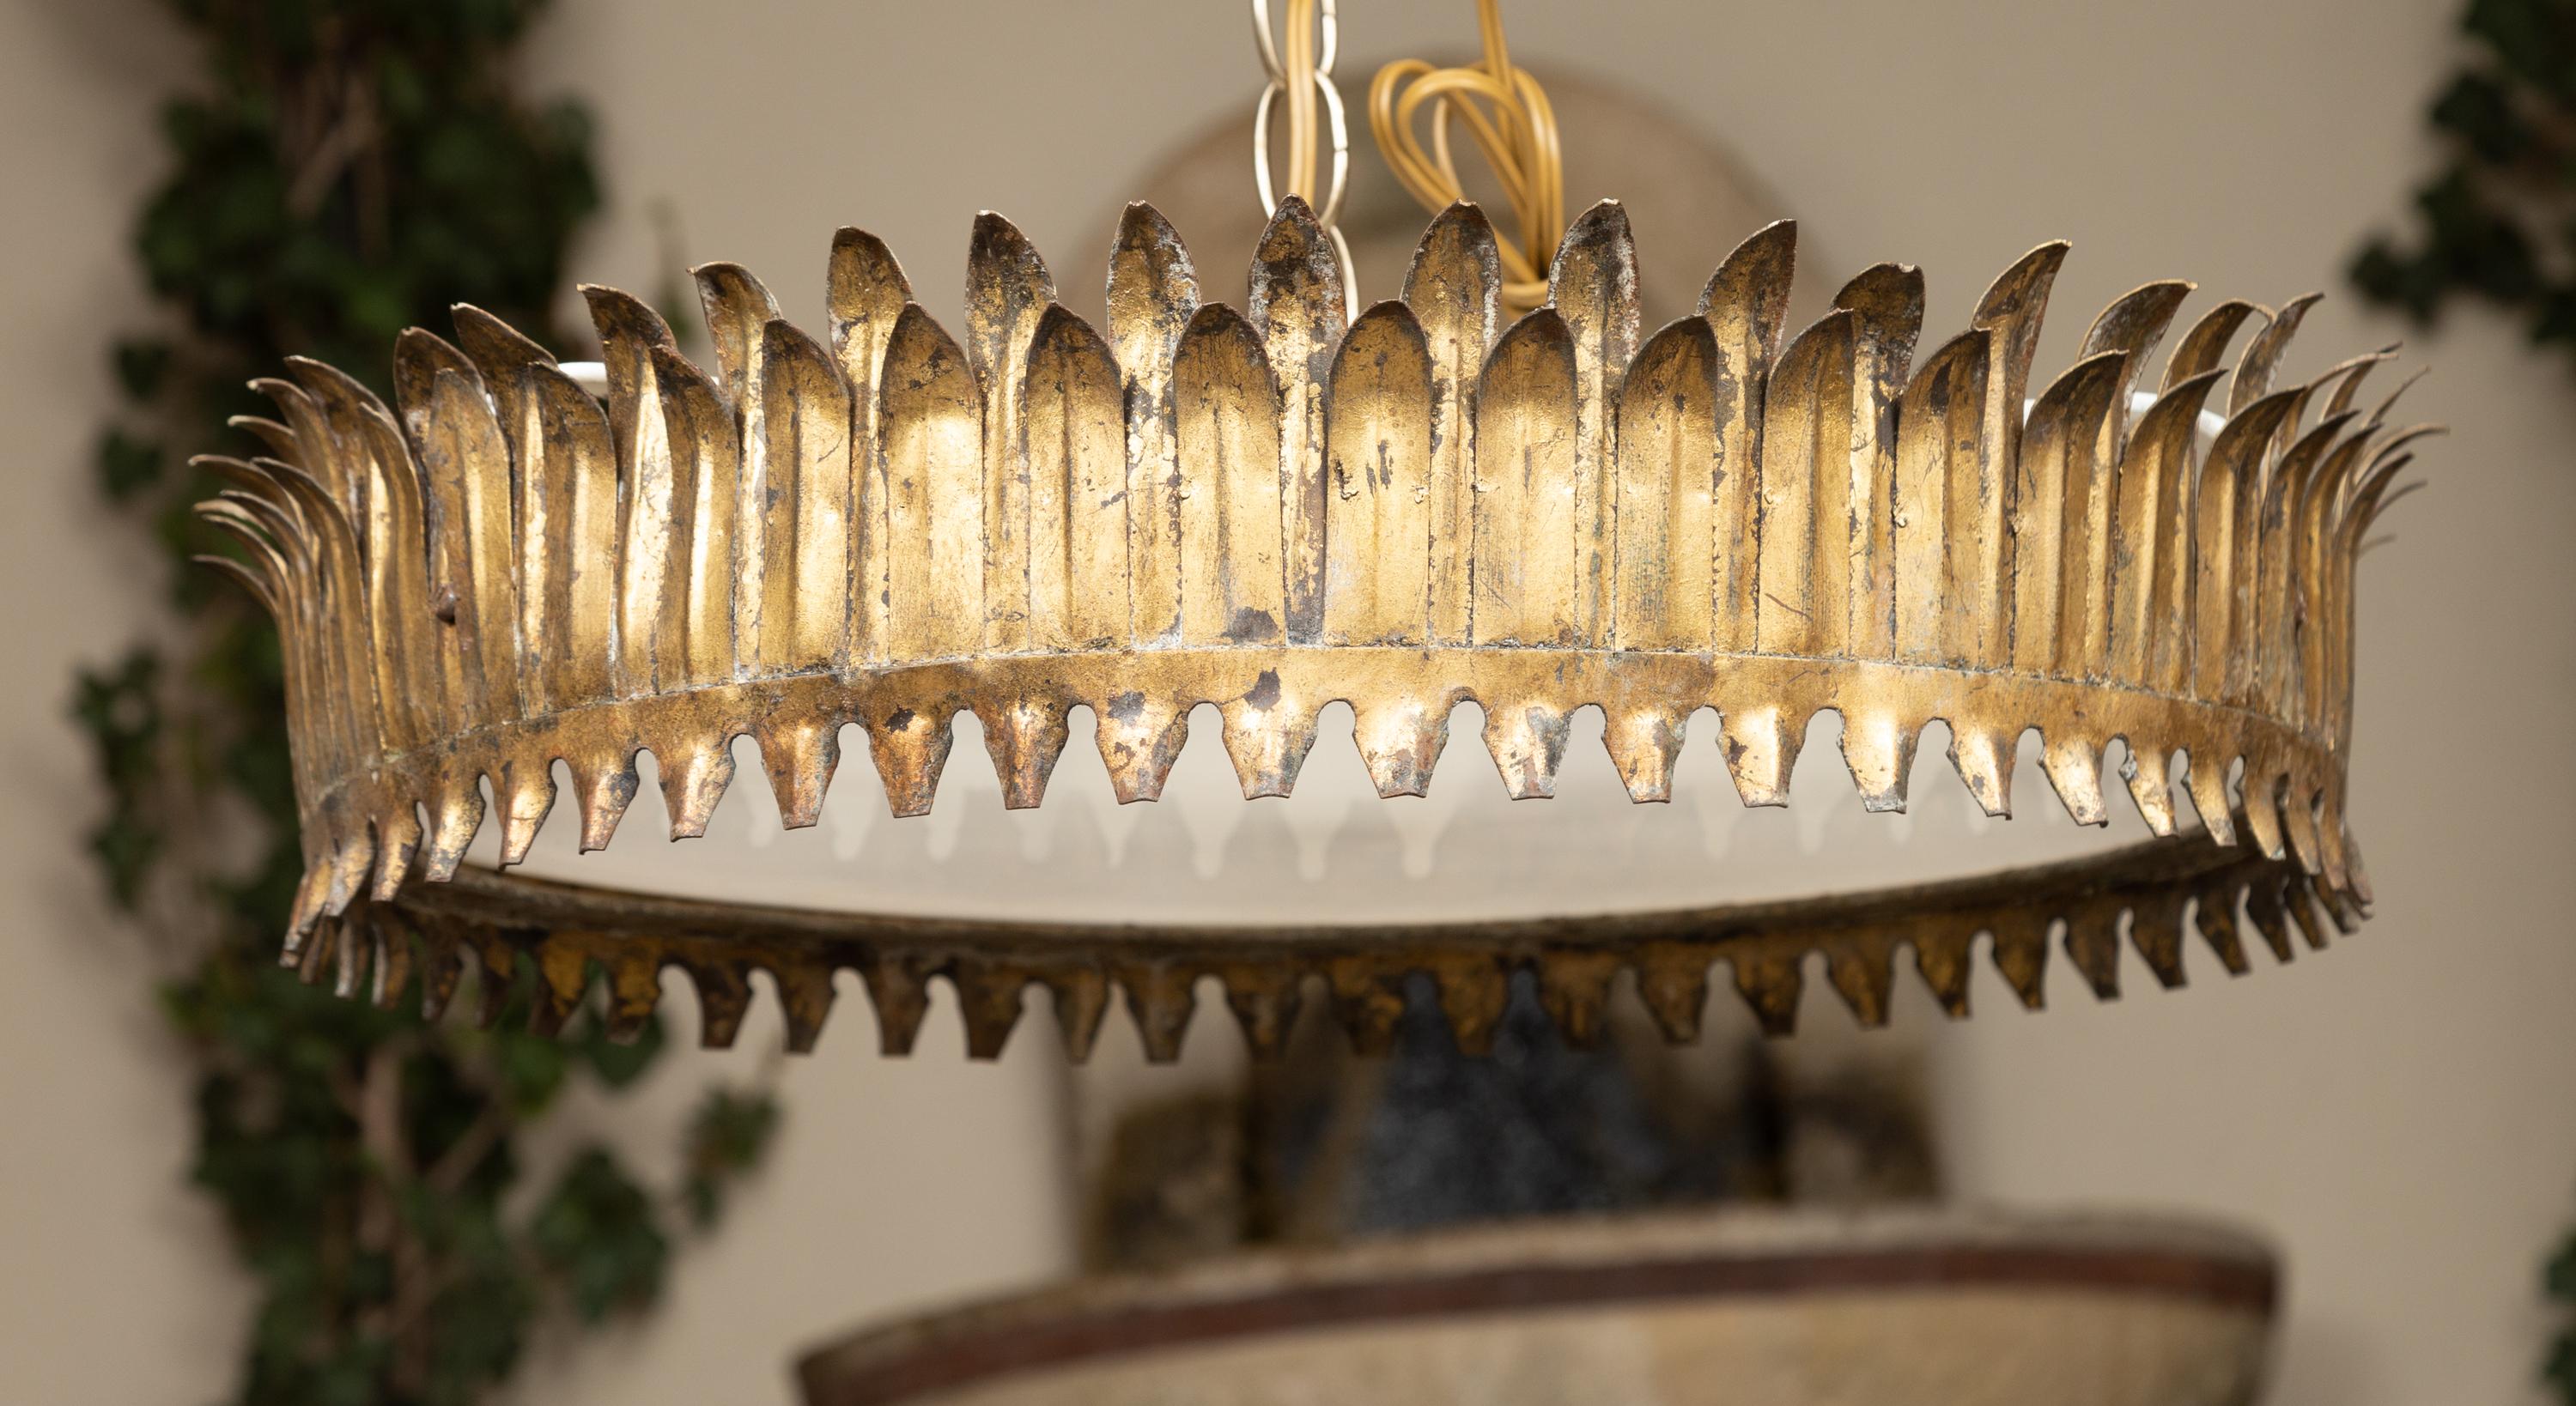 A Spanish vintage gilt metal three-bulb crown chandelier from the mid-20th century, with leaf motifs, frosted glass and new wiring. Created in Spain during the midcentury period, this vintage Spanish gilt metal semi-flush crown chandelier is adorned